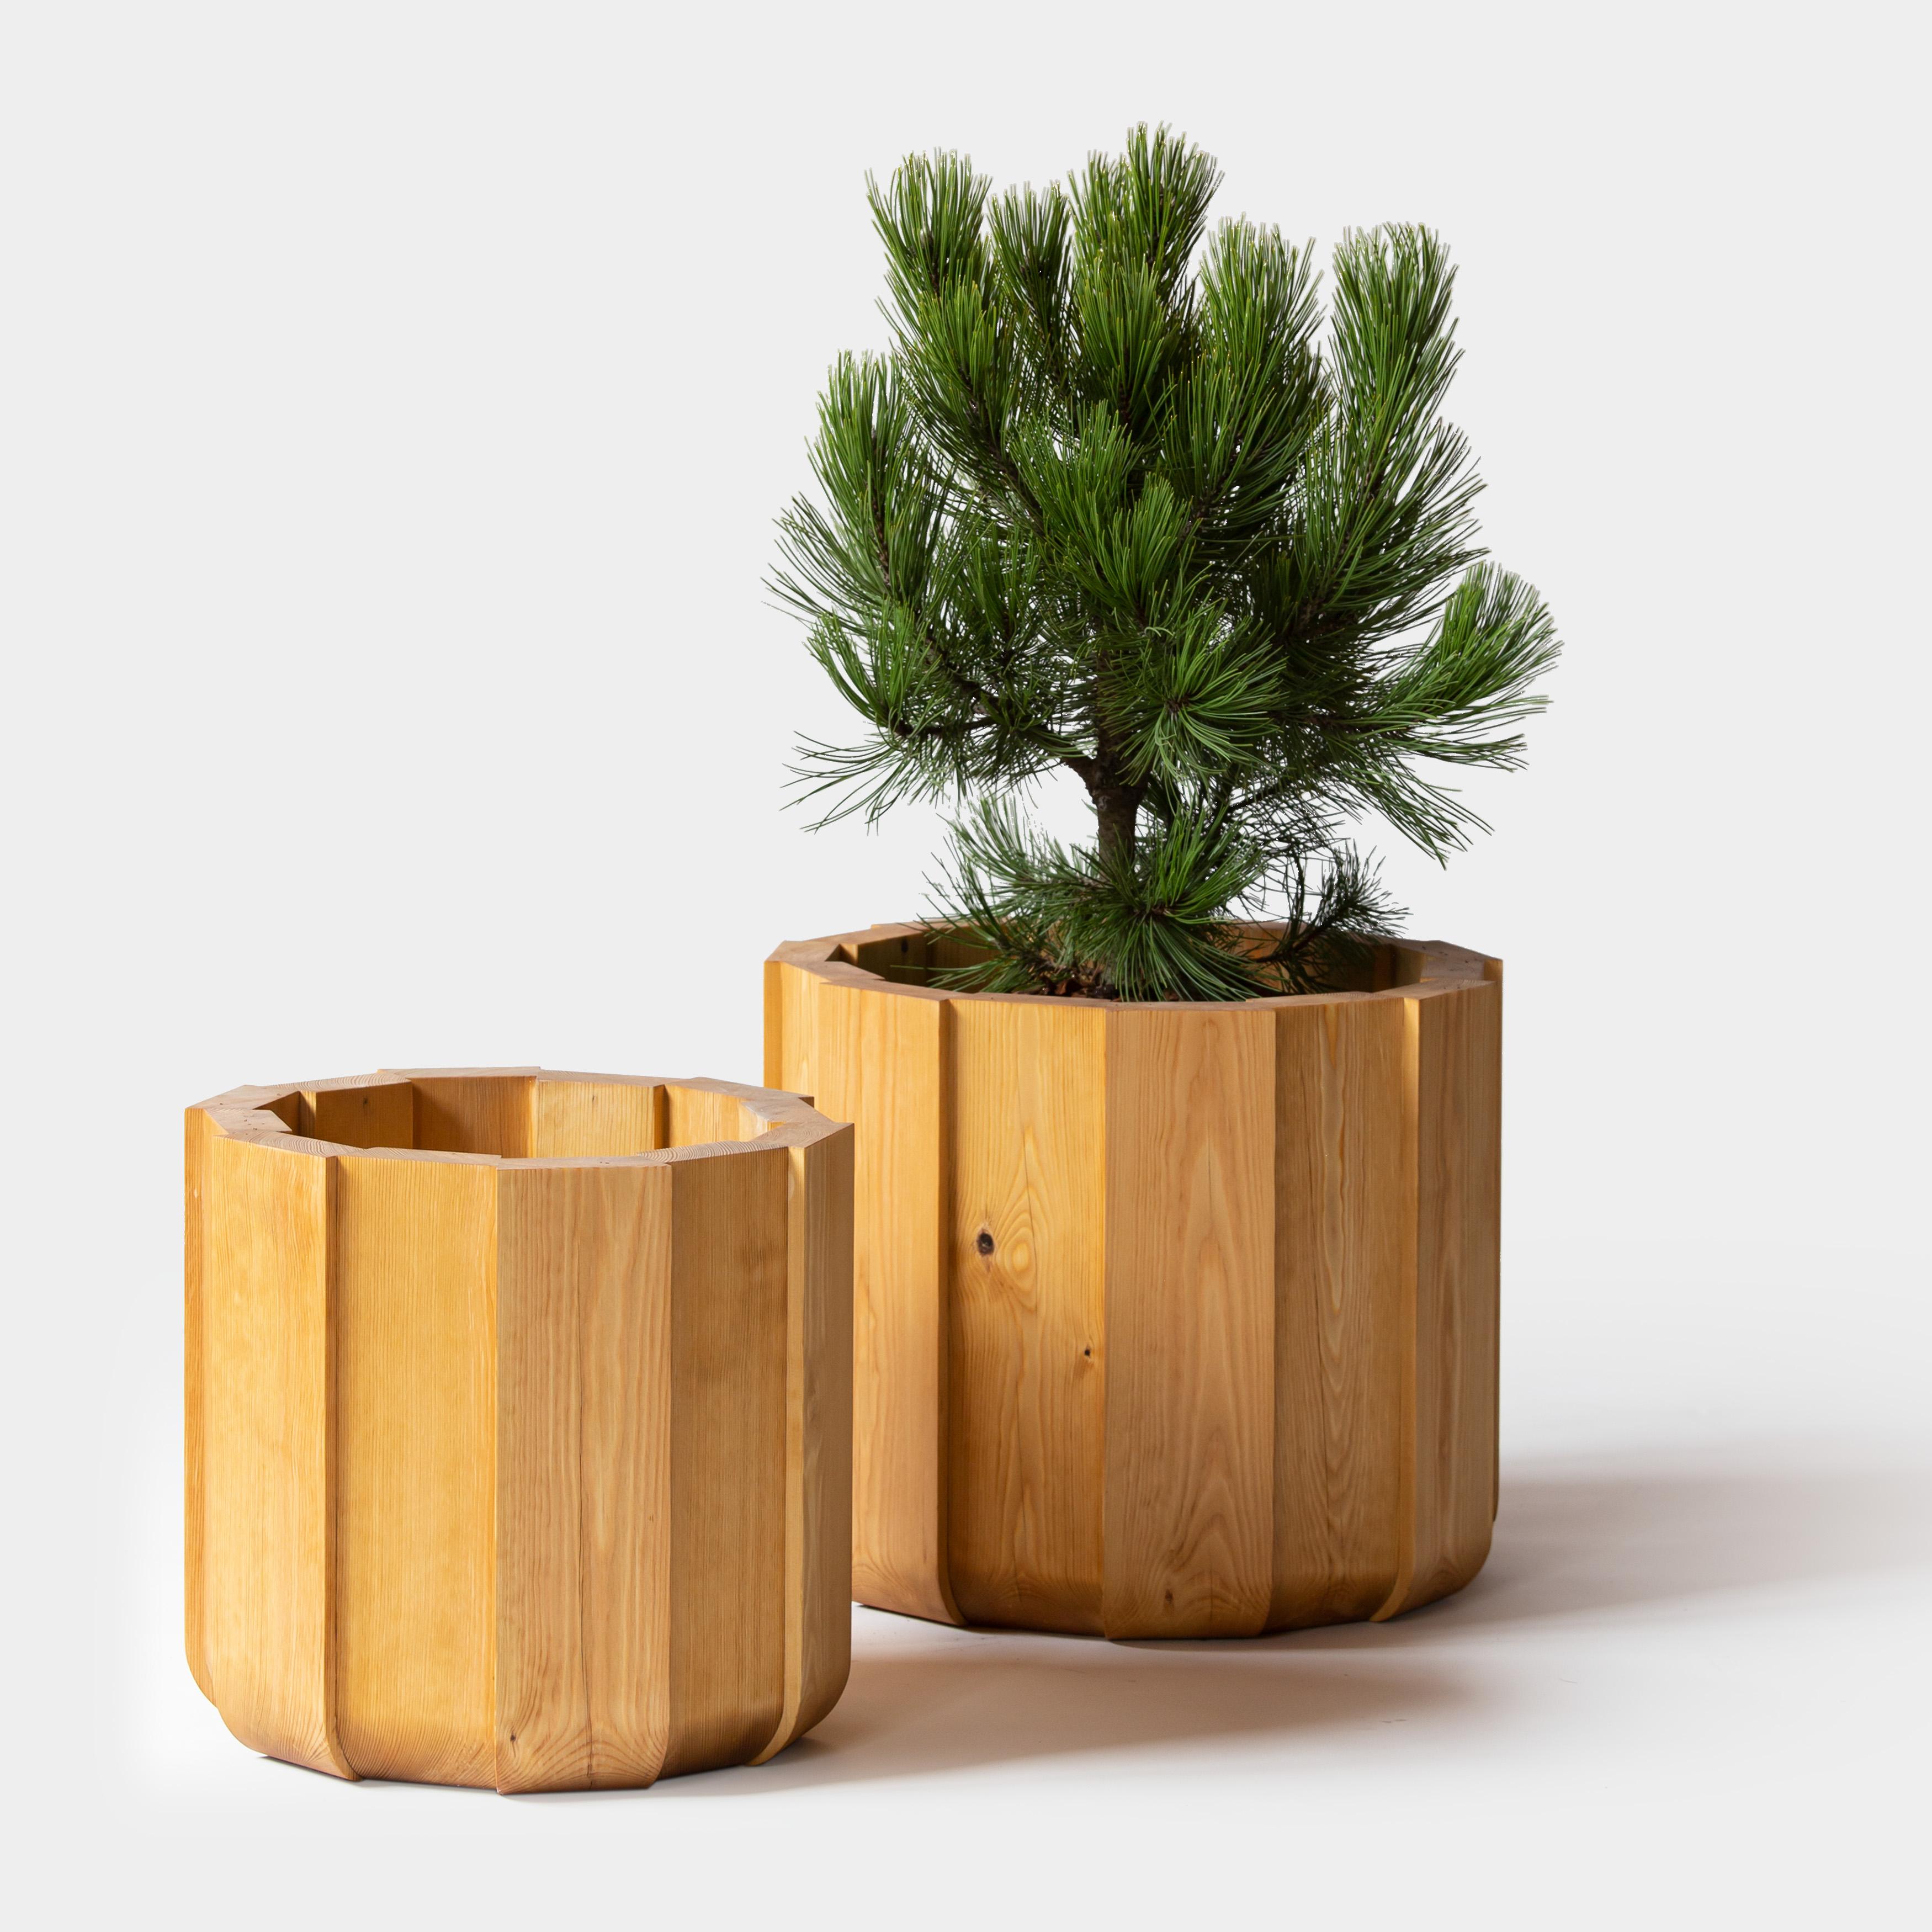 Kugge 52 Flower Pot from Ringvide, Pine, Natural or Pigmented Oil, Scandinavian For Sale